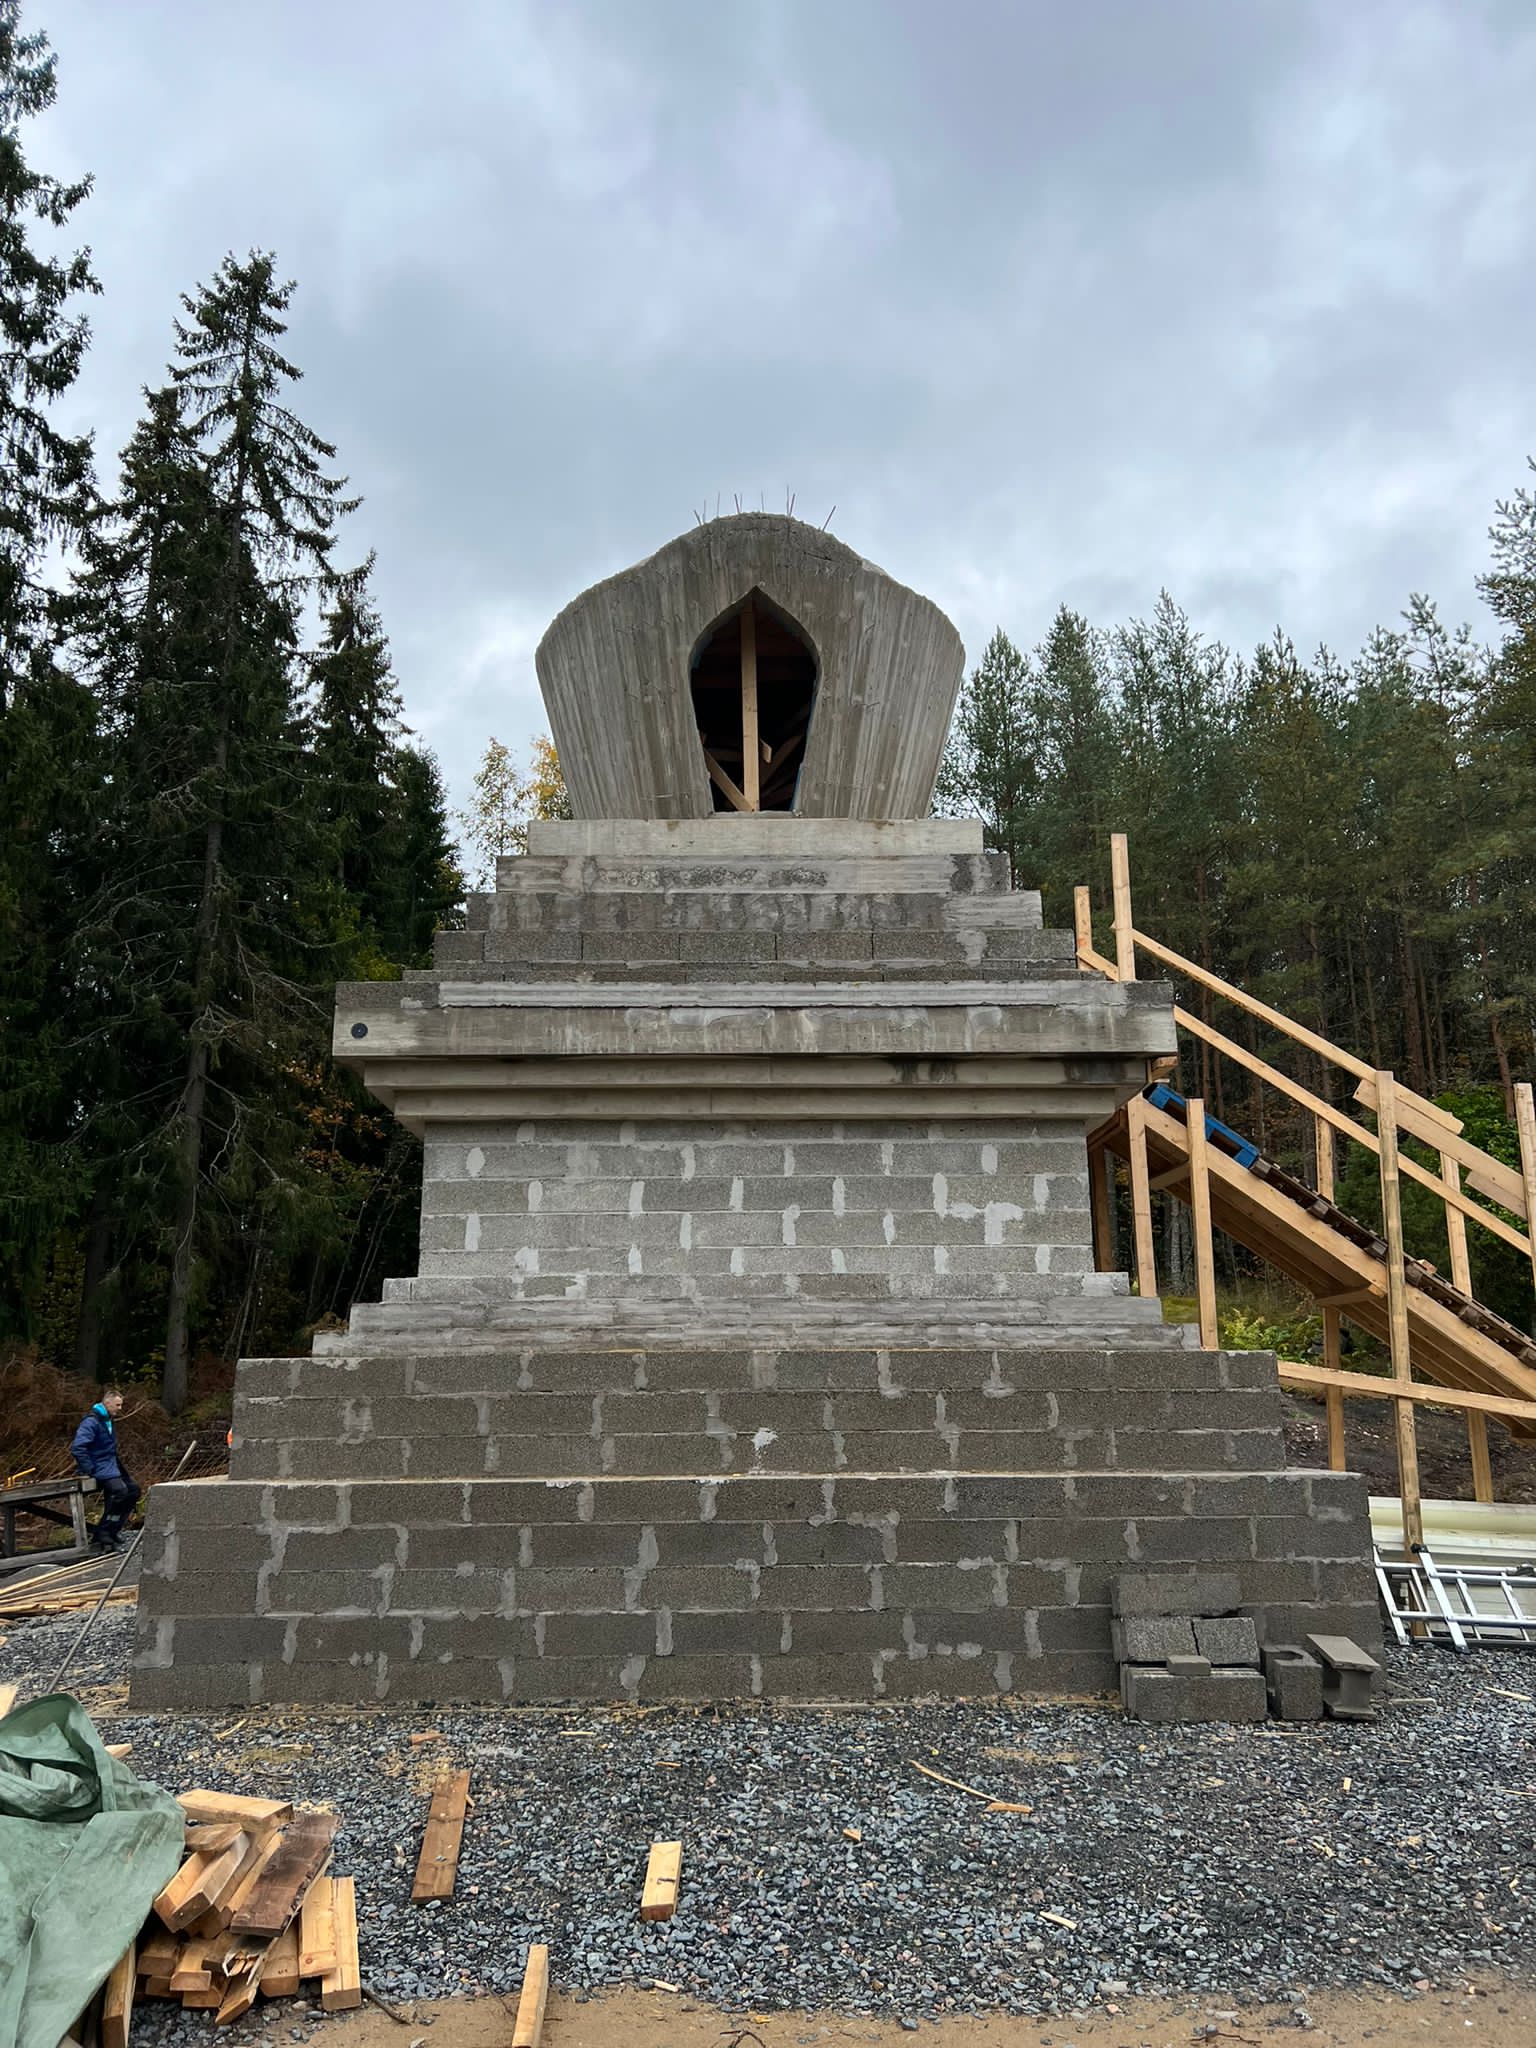 stupa being constructed in finland